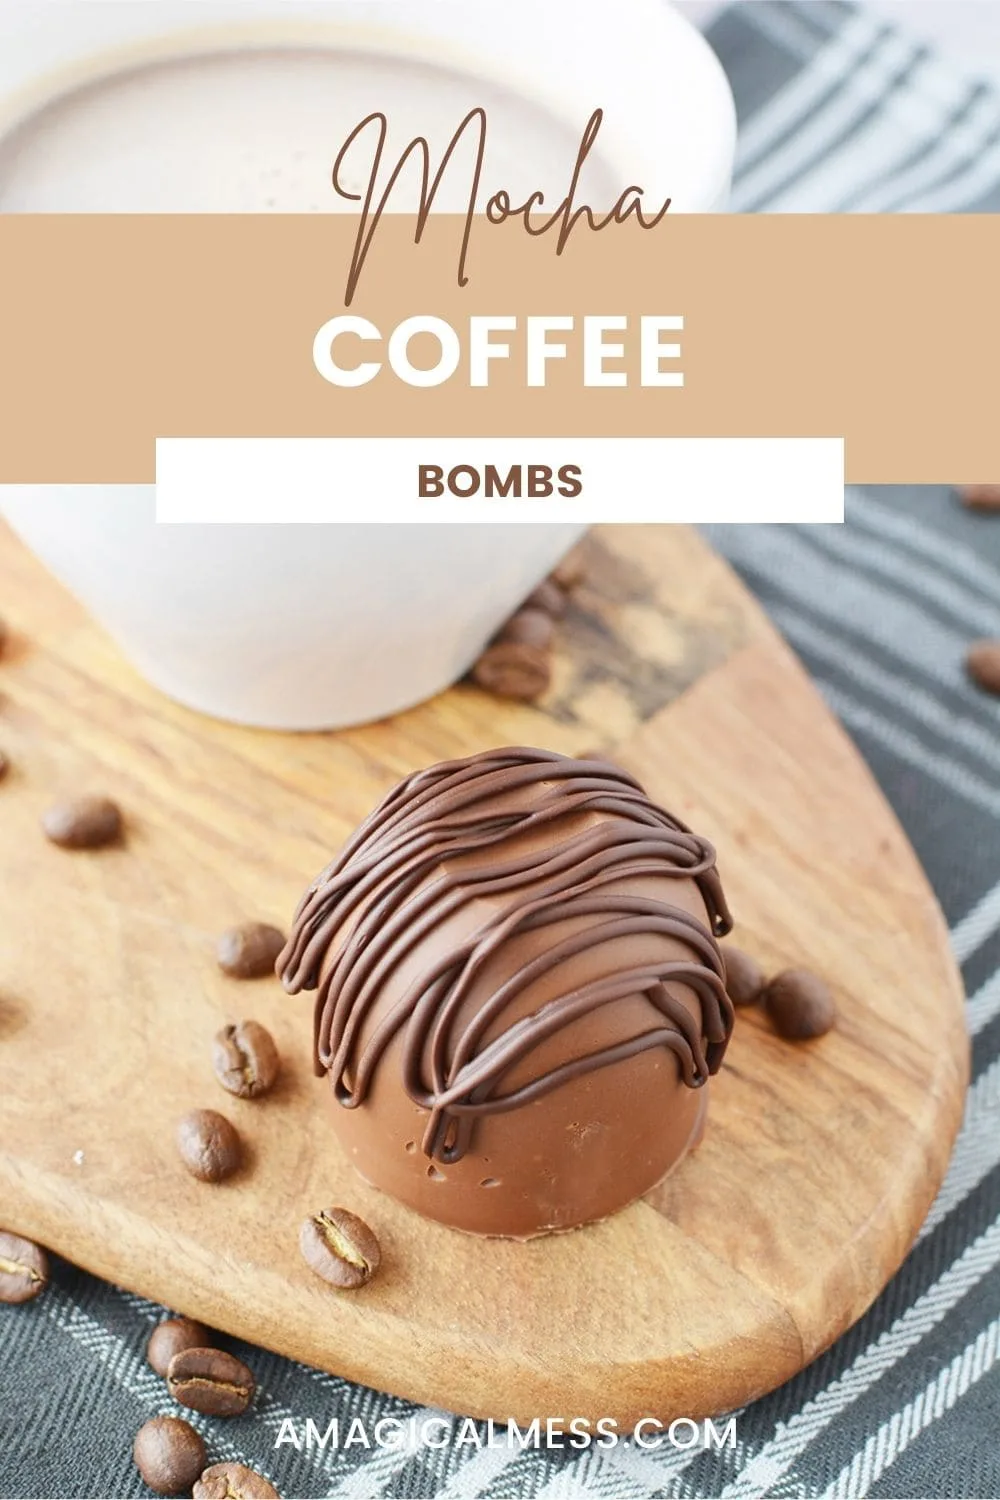 A coffee bomb sitting by coffee beans and a white mug.